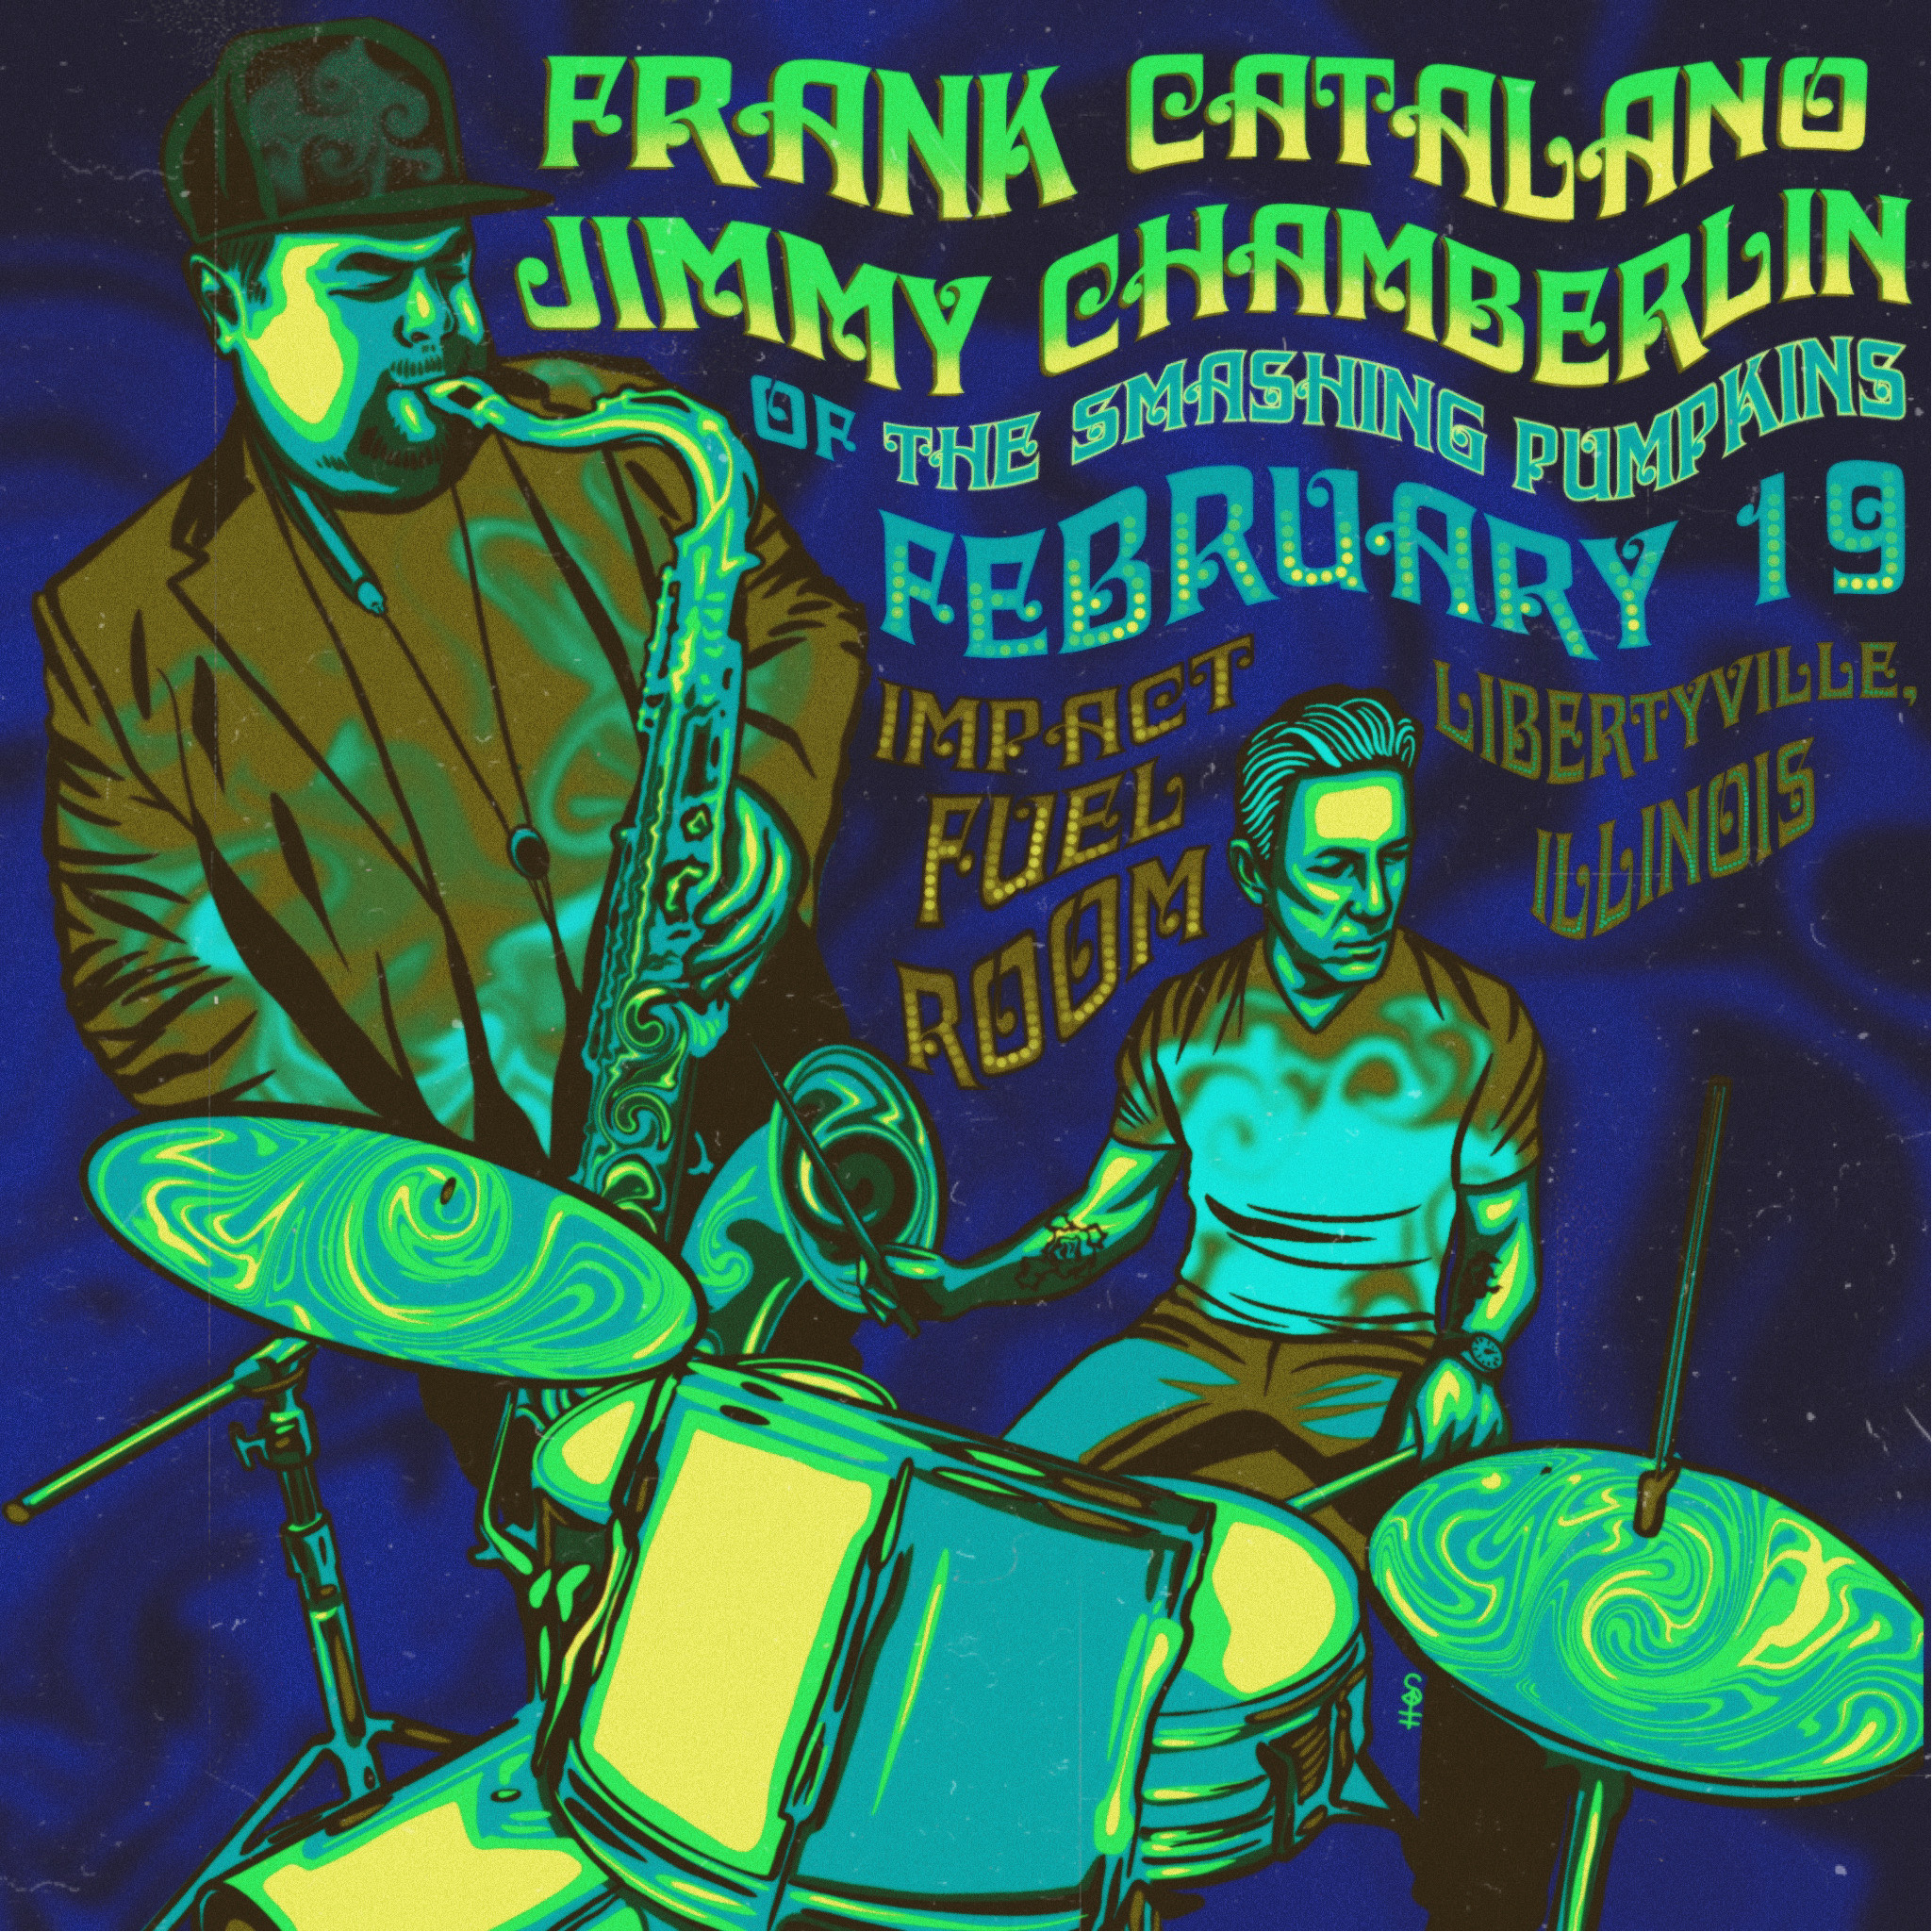 Frank Catalano & Jimmy Chamberlin of the Smashing Pumpkins show poster